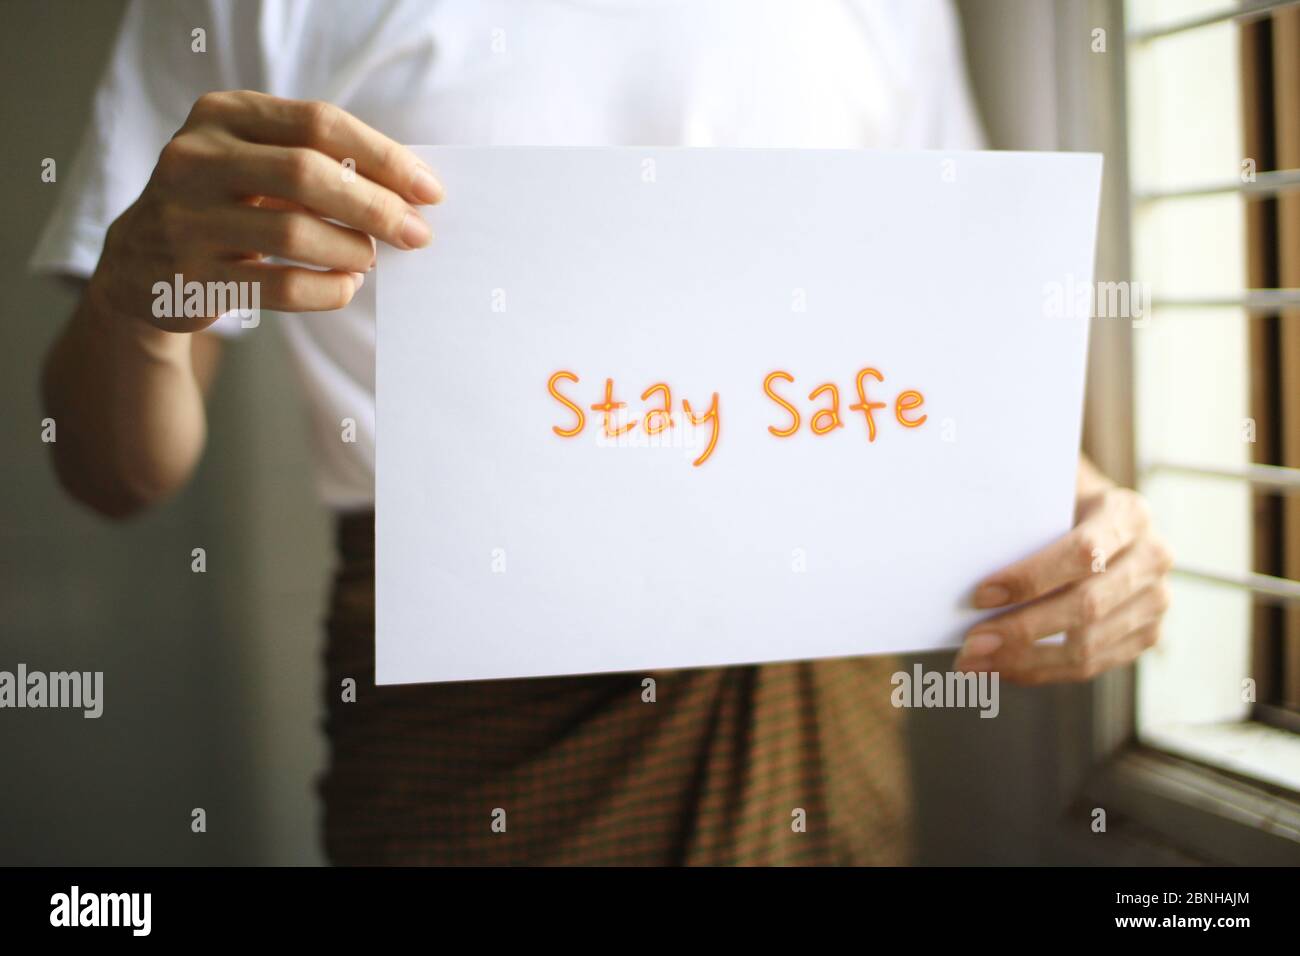 Wash your hands with water. Stay at Home, Stay Safe. Stock Photo